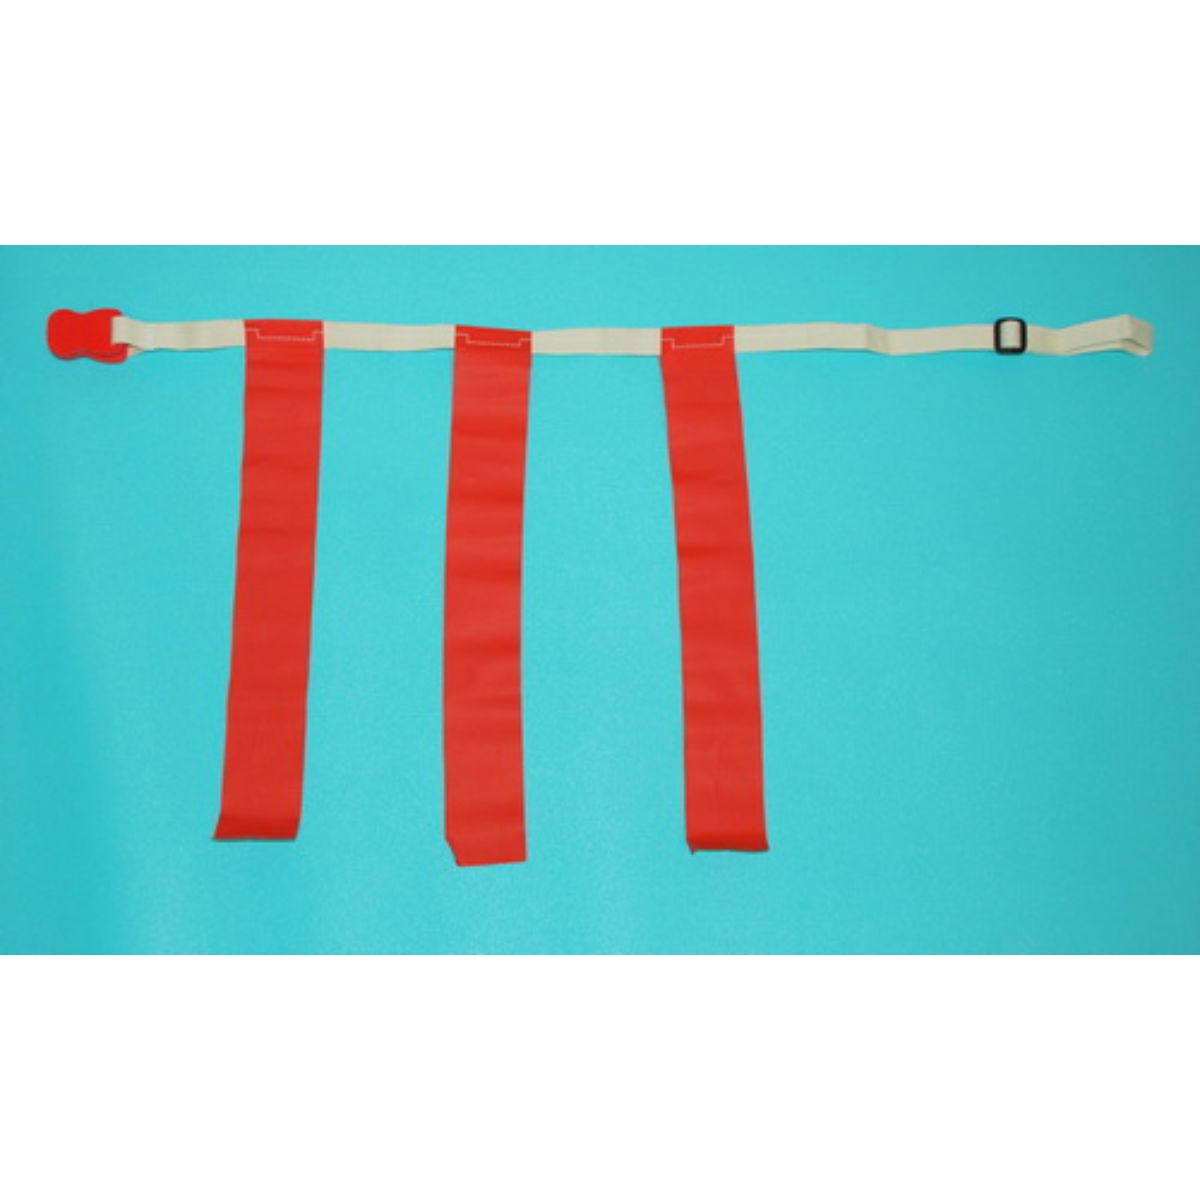 Picture of Everrich EVC-0037 Flag Belt - Adjustable Rip - 30-44 Inch Waist - Set of 1 Belt  3 Flags with Clip